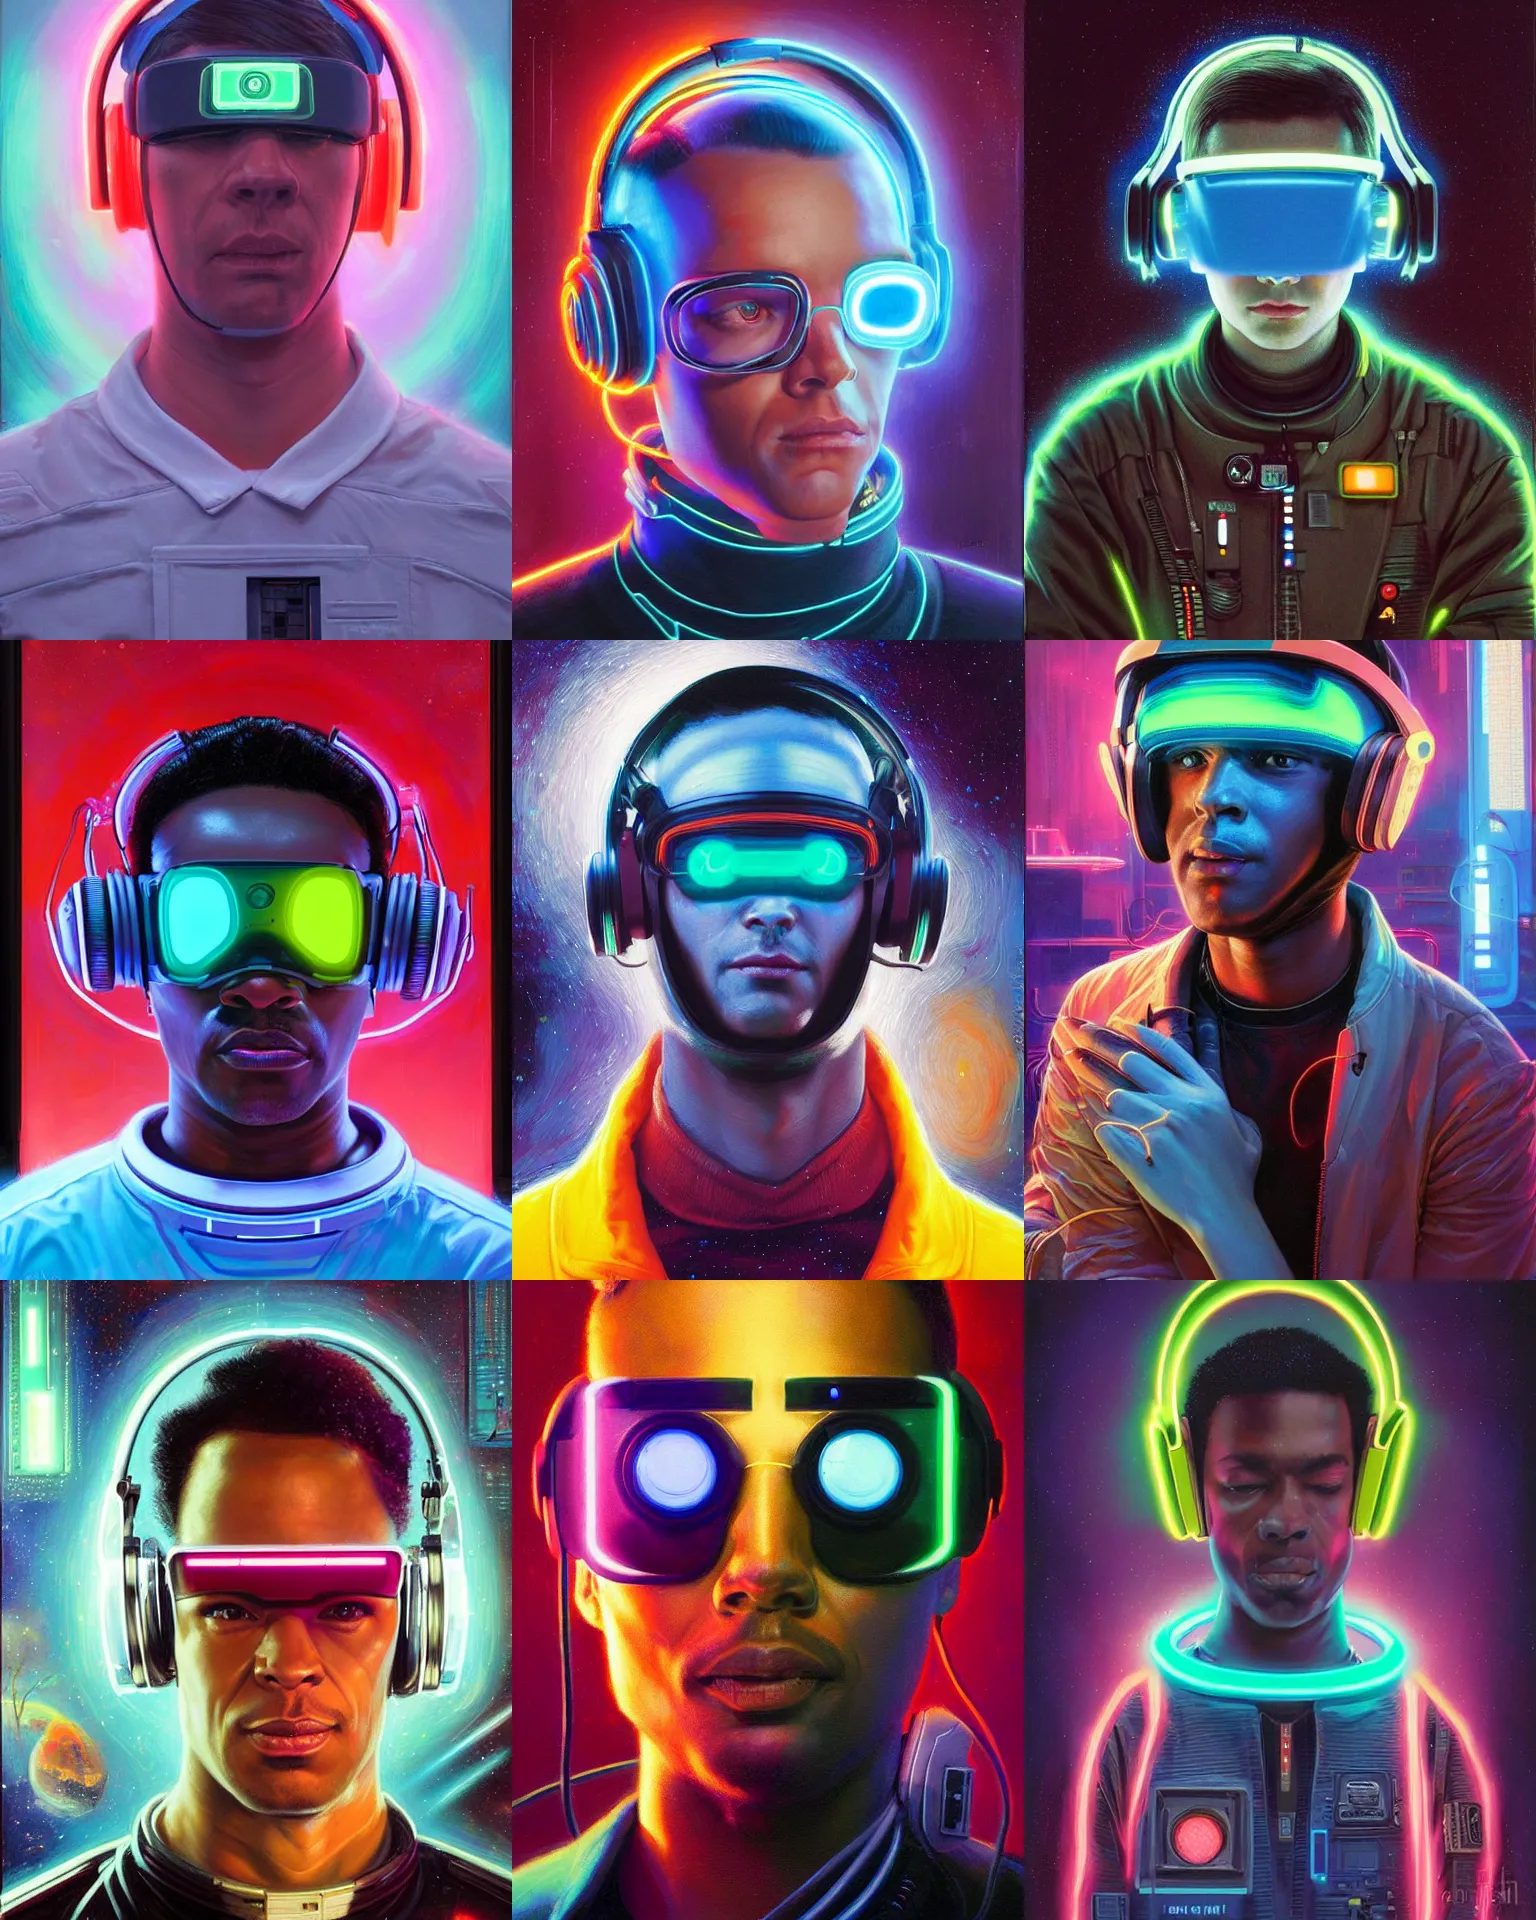 Prompt: neon cyberpunk programmer with glowing geordi visor over eyes and sleek headphones headshot desaturated portrait painting by donato giancola, dean cornwall, rhads, tom whalen, conrad roset astronaut fashion photography background by alex grey